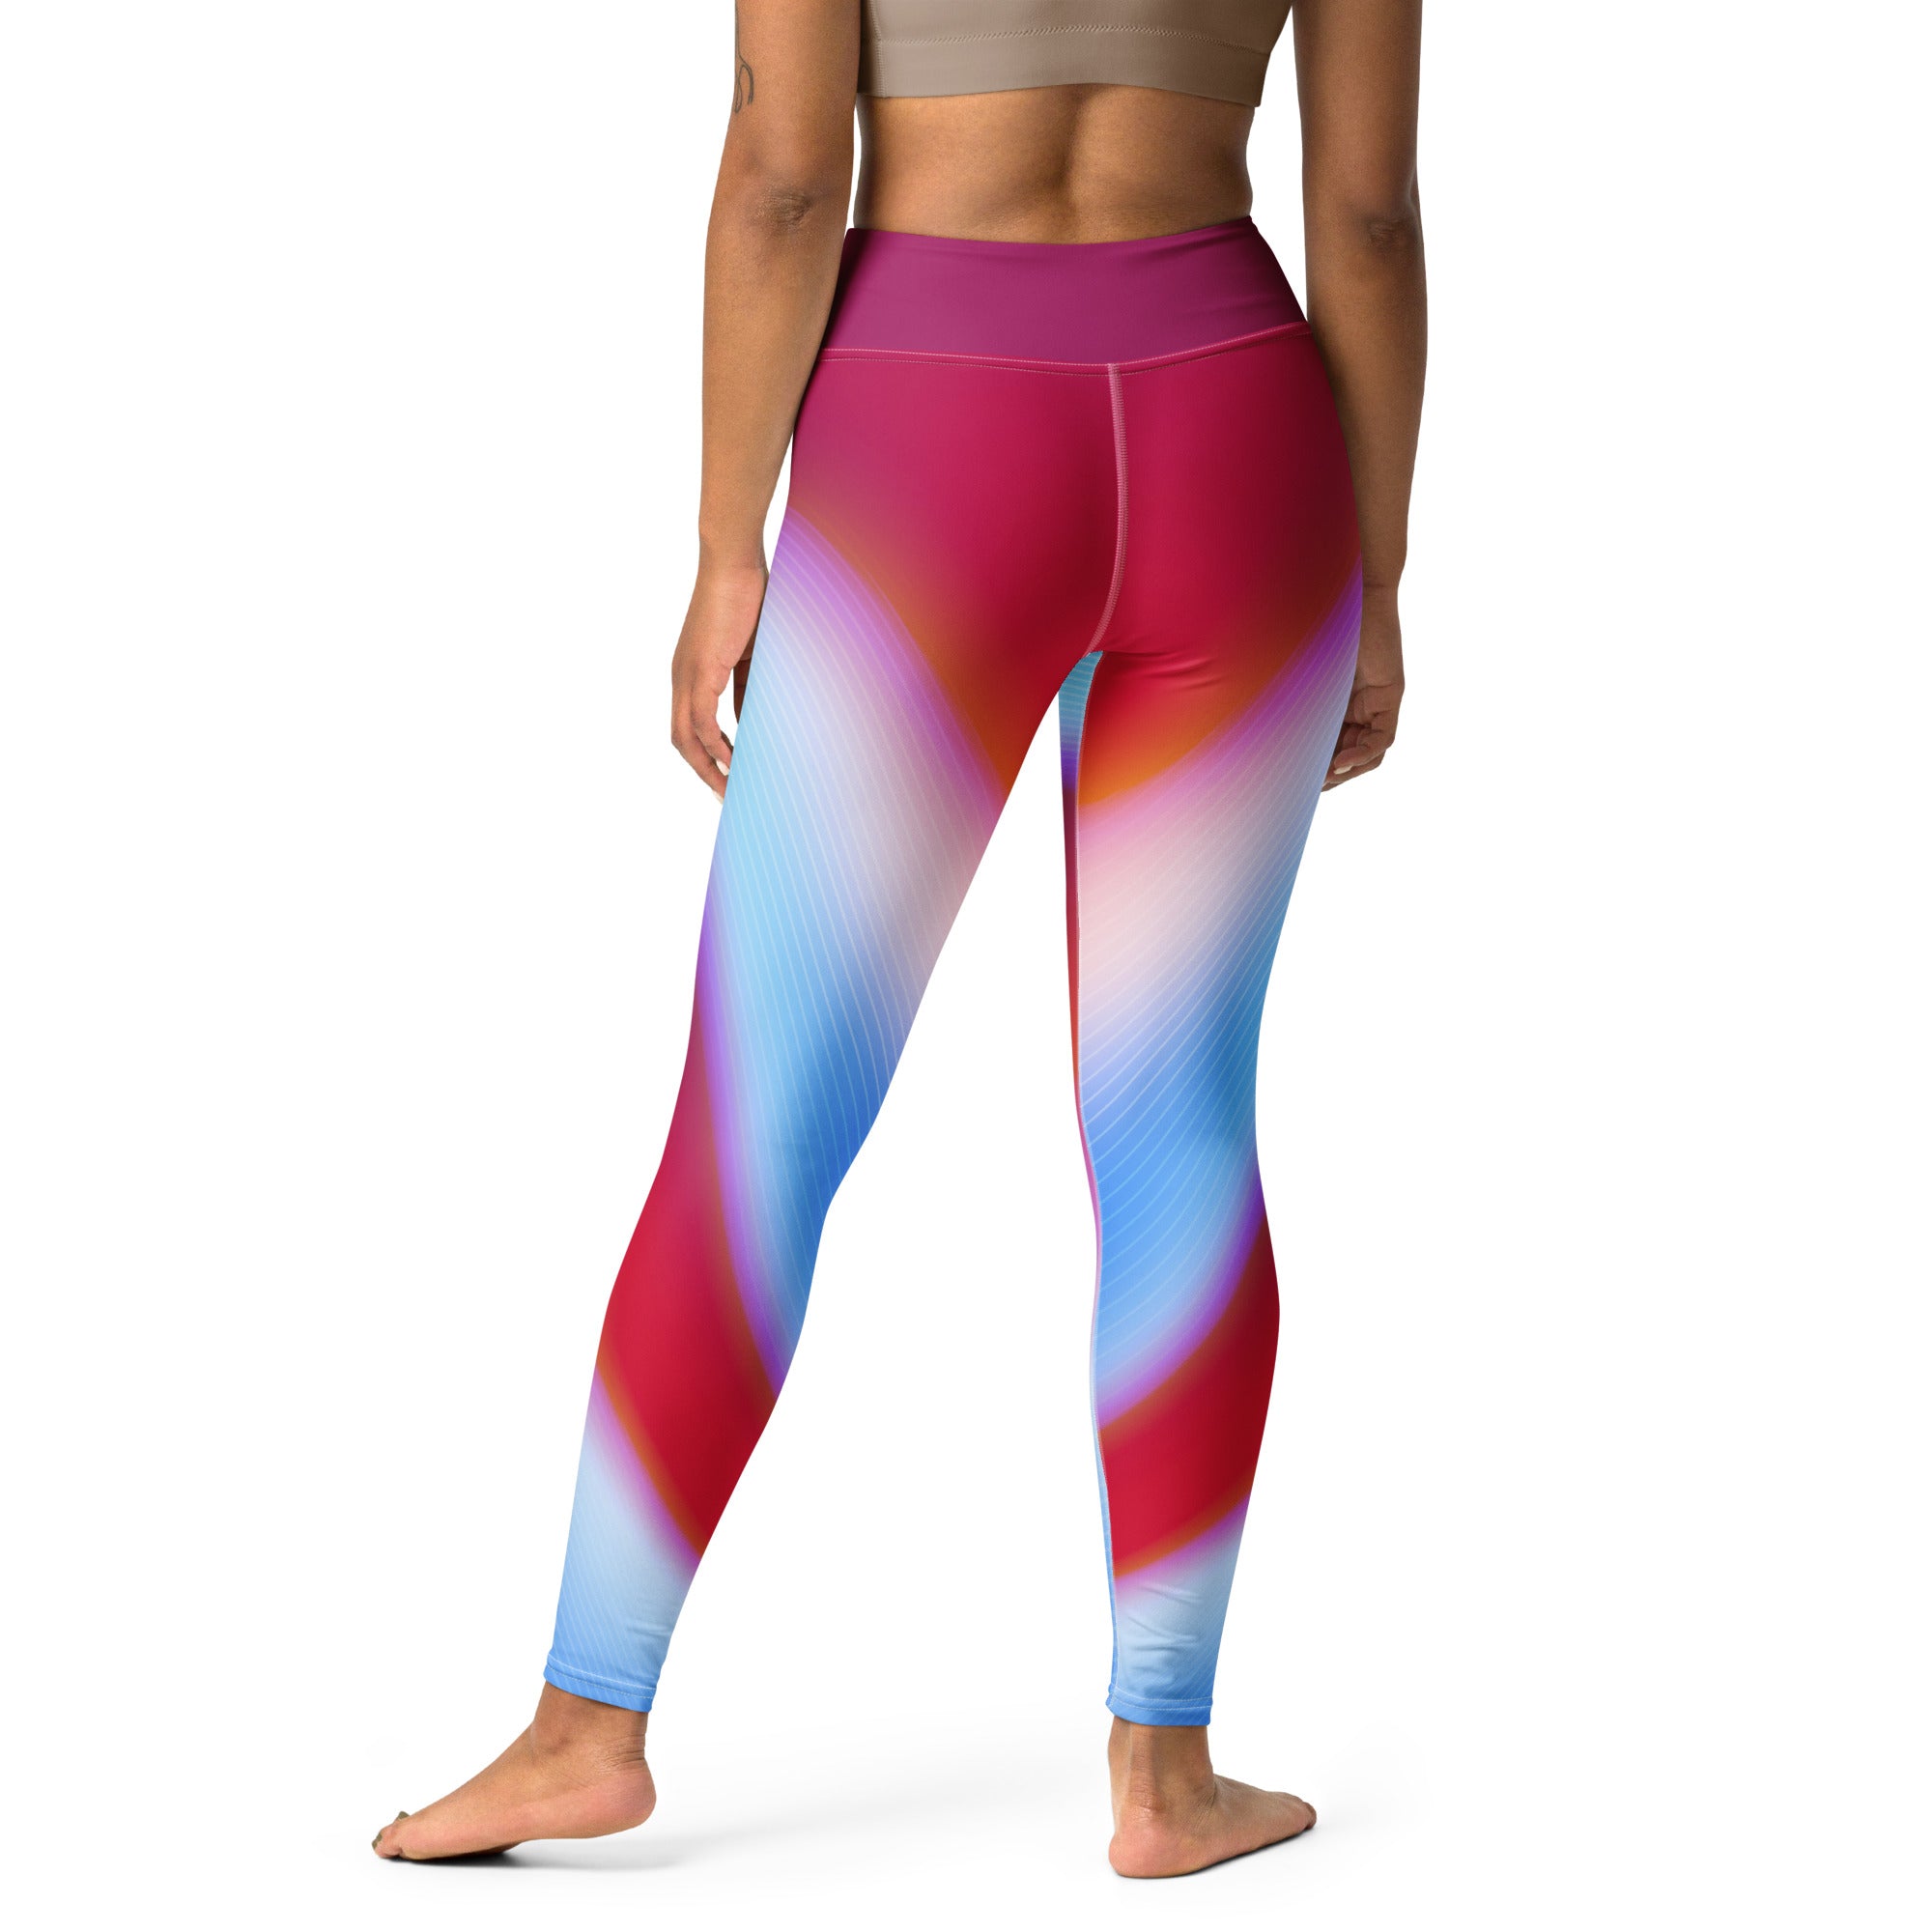 Illuminating a workout with the radiant colors of Sunset Wave Wavy Gradient Leggings.